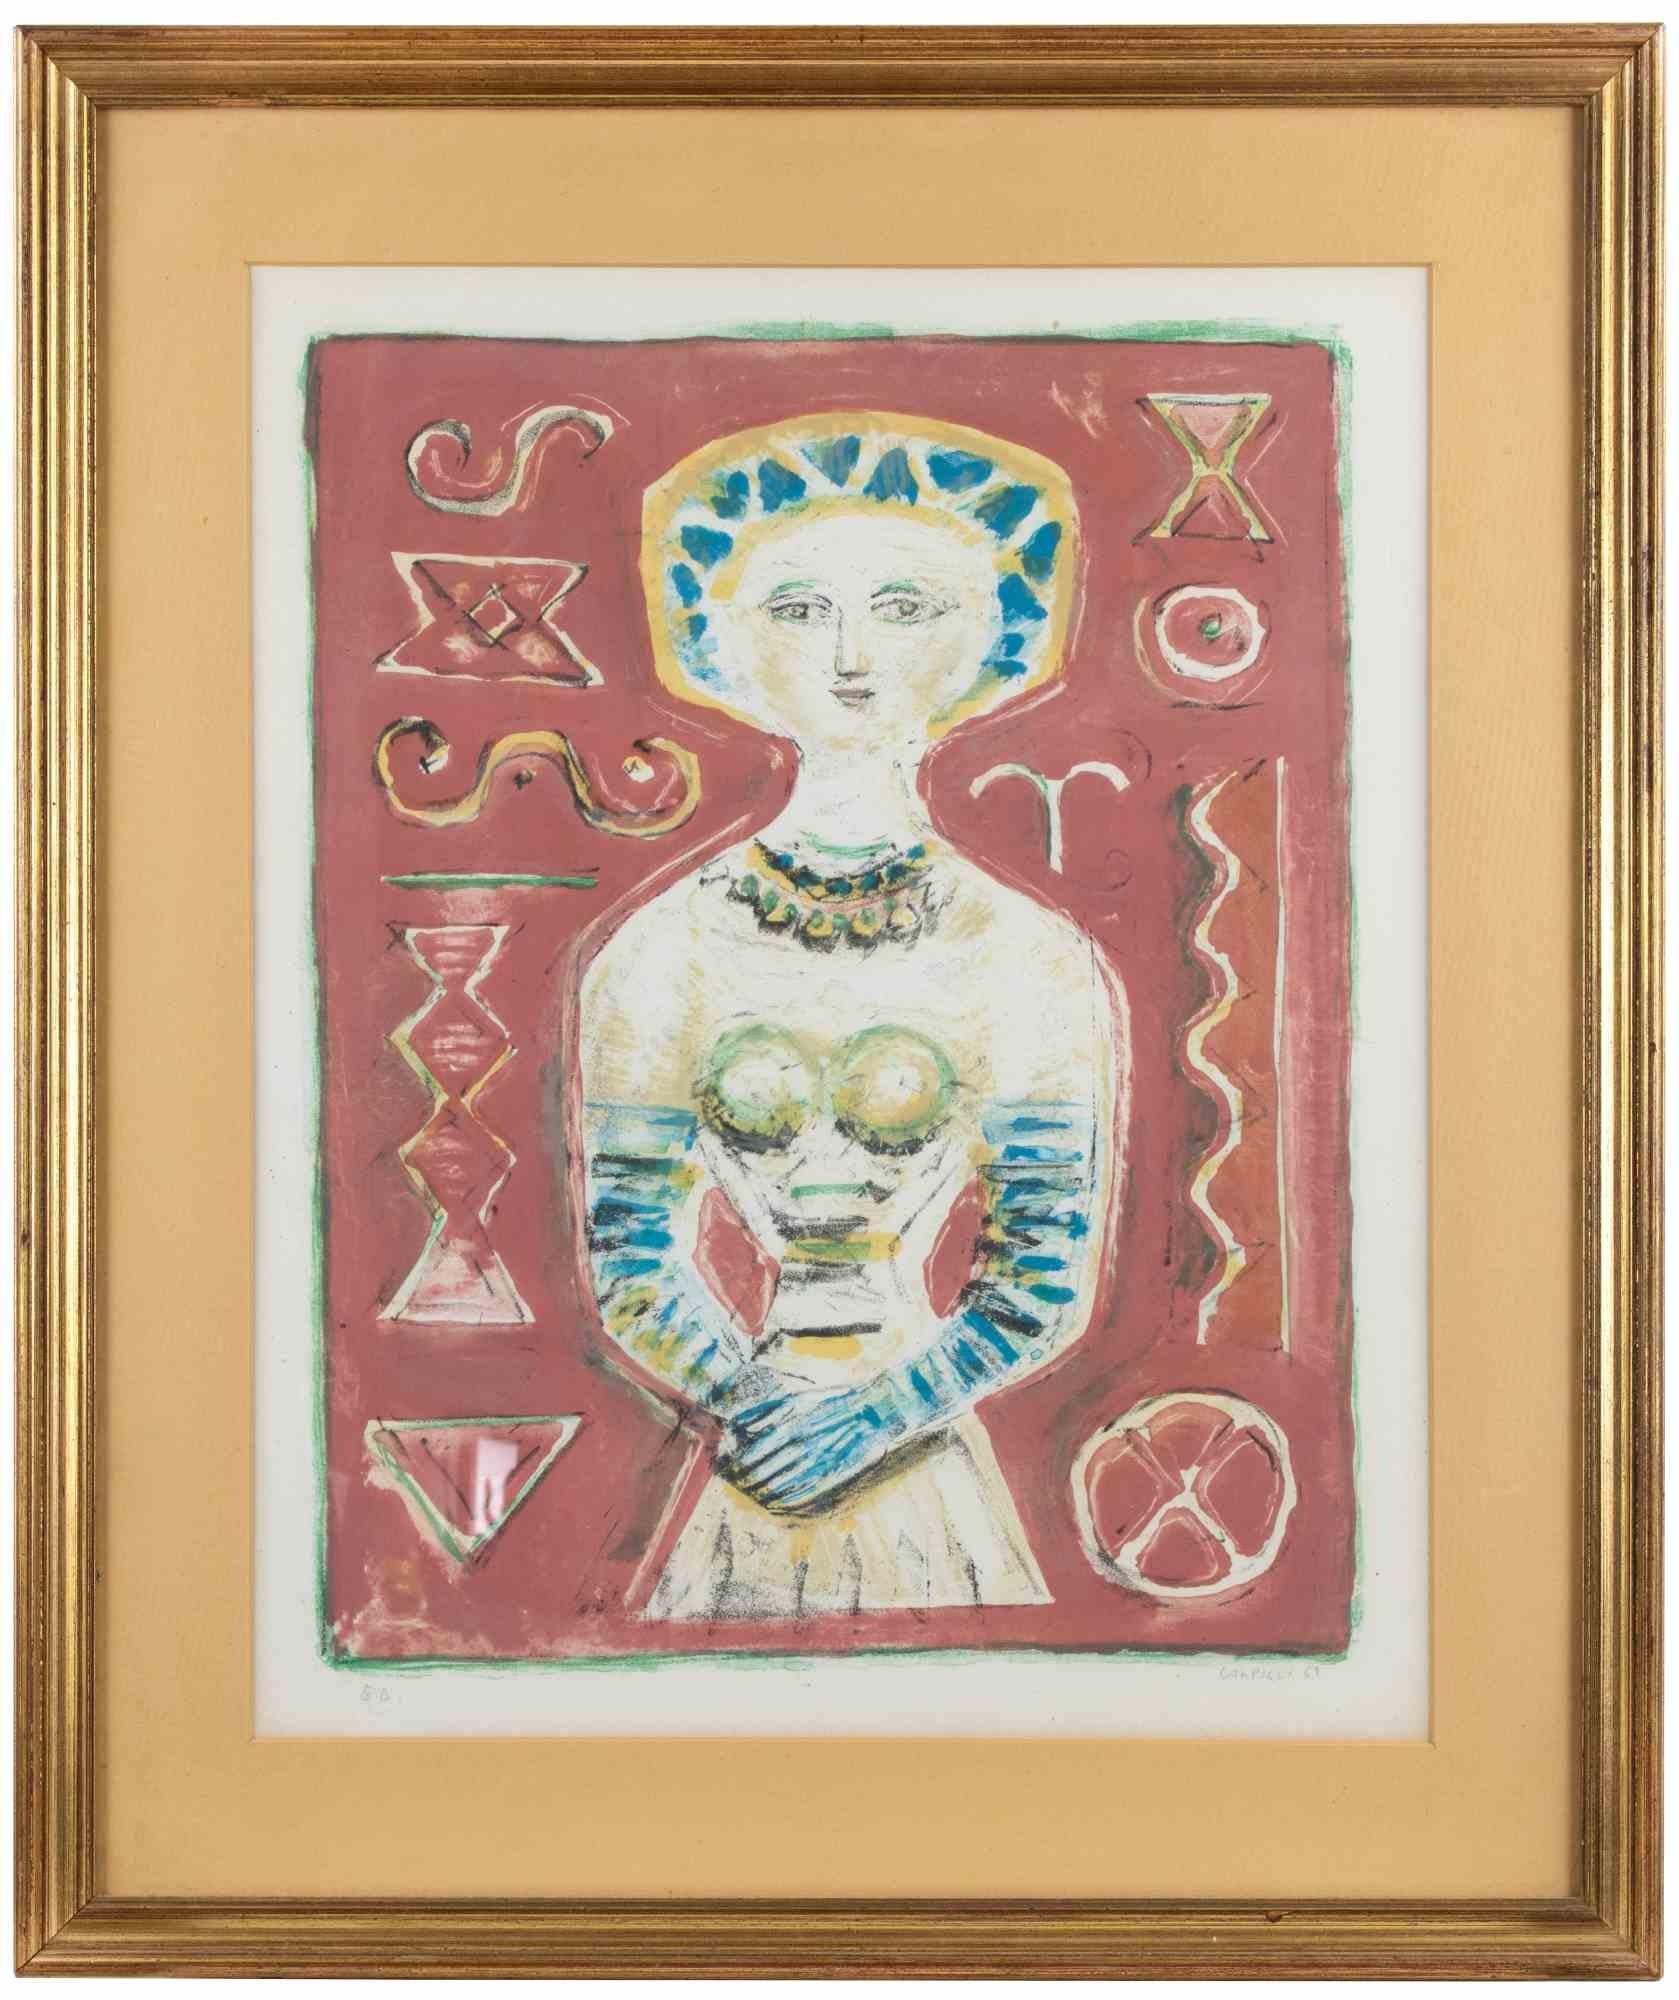 Woman with blue gloves is a modern artwork realized by Massimo Campigli in 1967

Mixed colored lithograph.

Hand signed and dated in the lower margin.

Artist proof (as reported on the lower margin).

Includes frame.